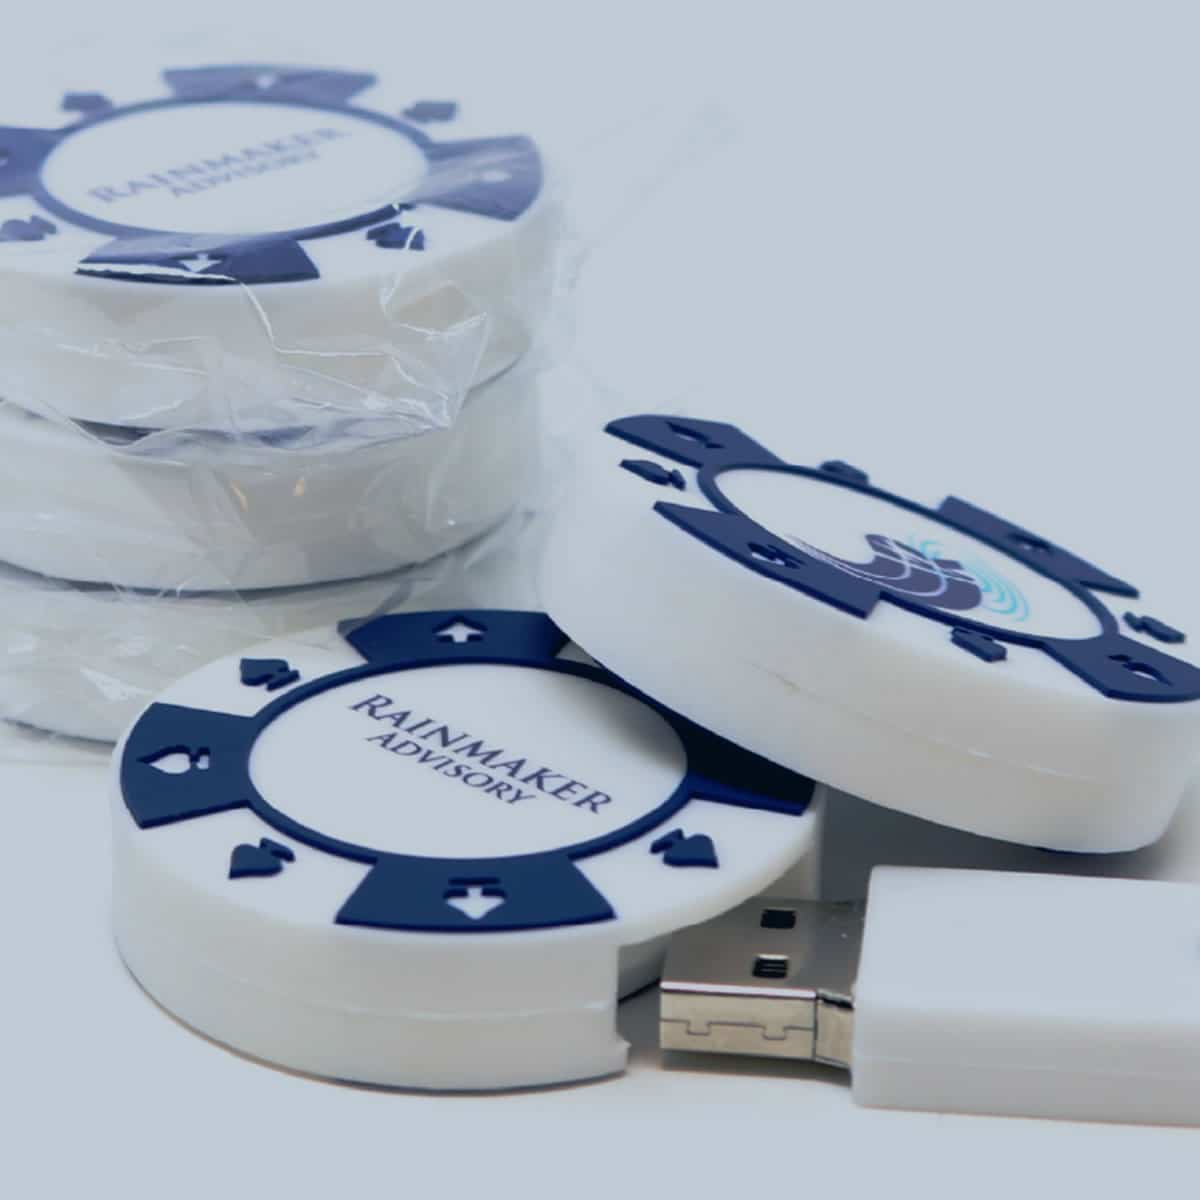 Promo Items Chips and Thumb Drive